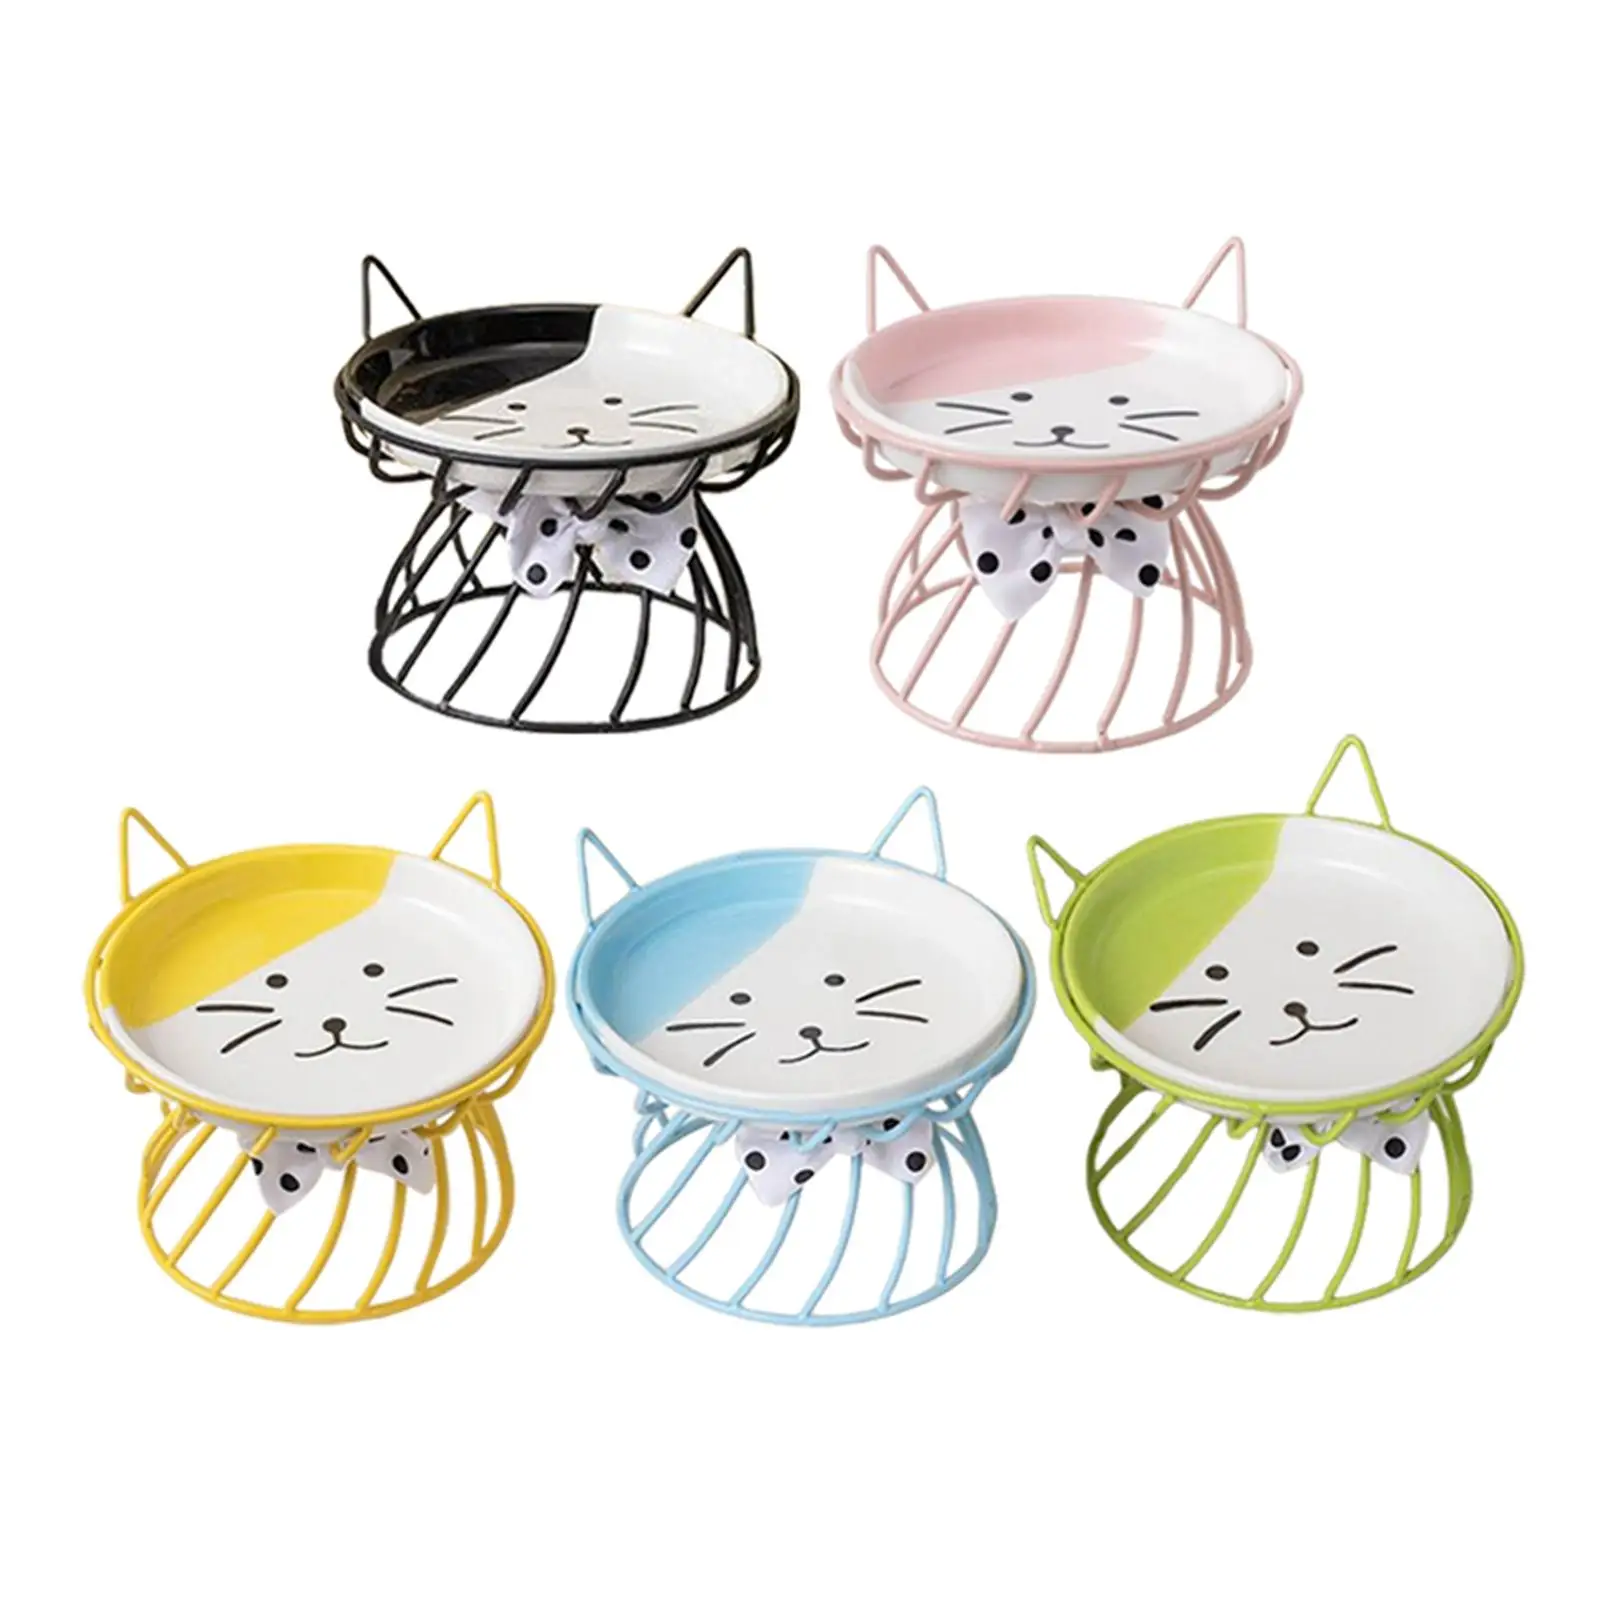 Elevated Cat Ceramic Bowls, Kitten Puppy Raised Food Feeding Dishes, Water Stand Feeder for Cats and Small Dogs